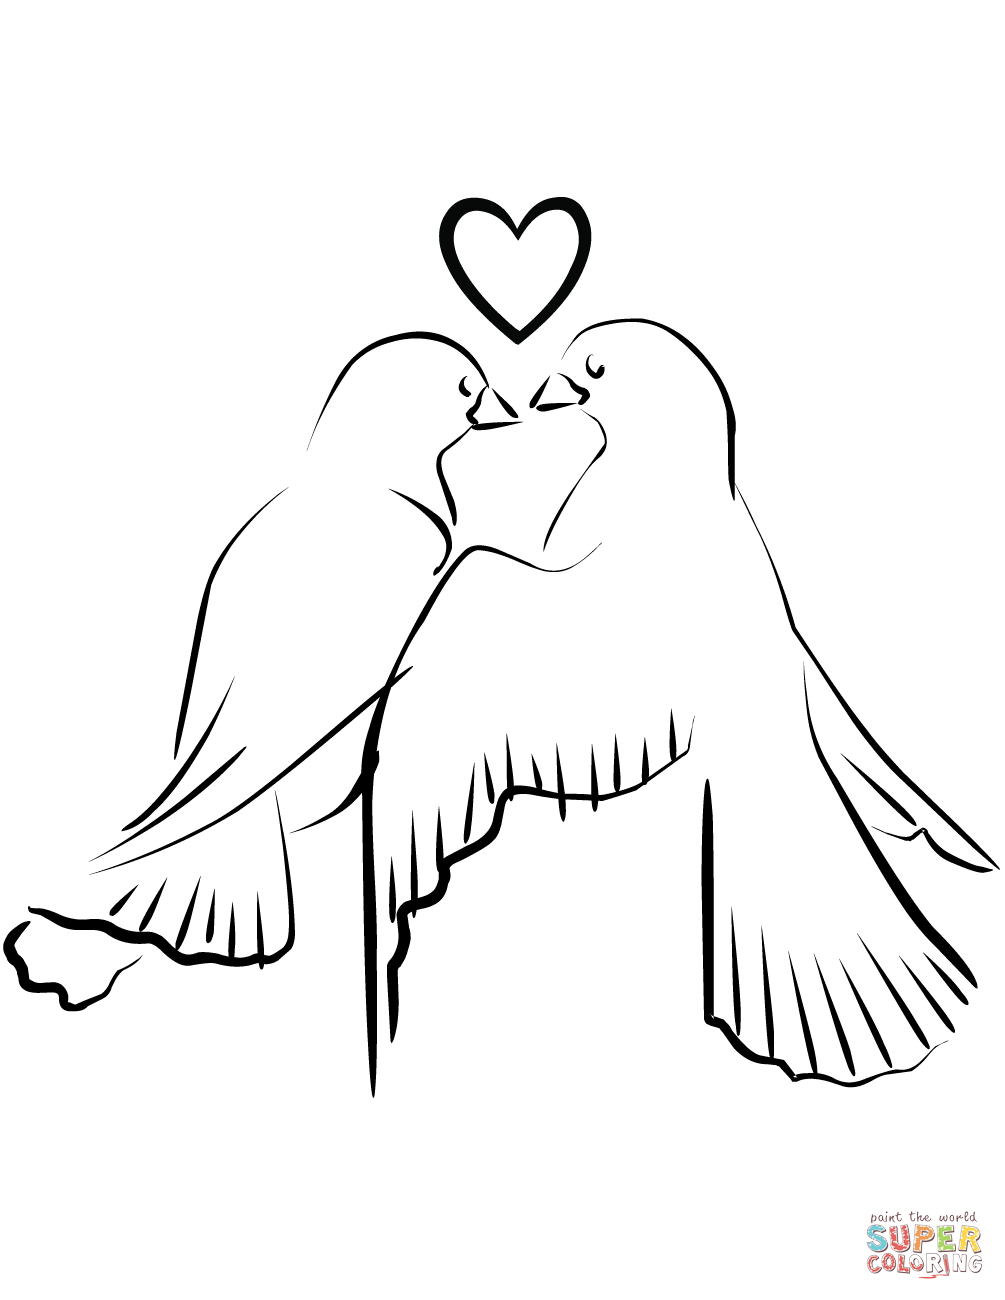 Love Bird Coloring Pages Love Birds Coloring Page Free Printable Coloring Pages